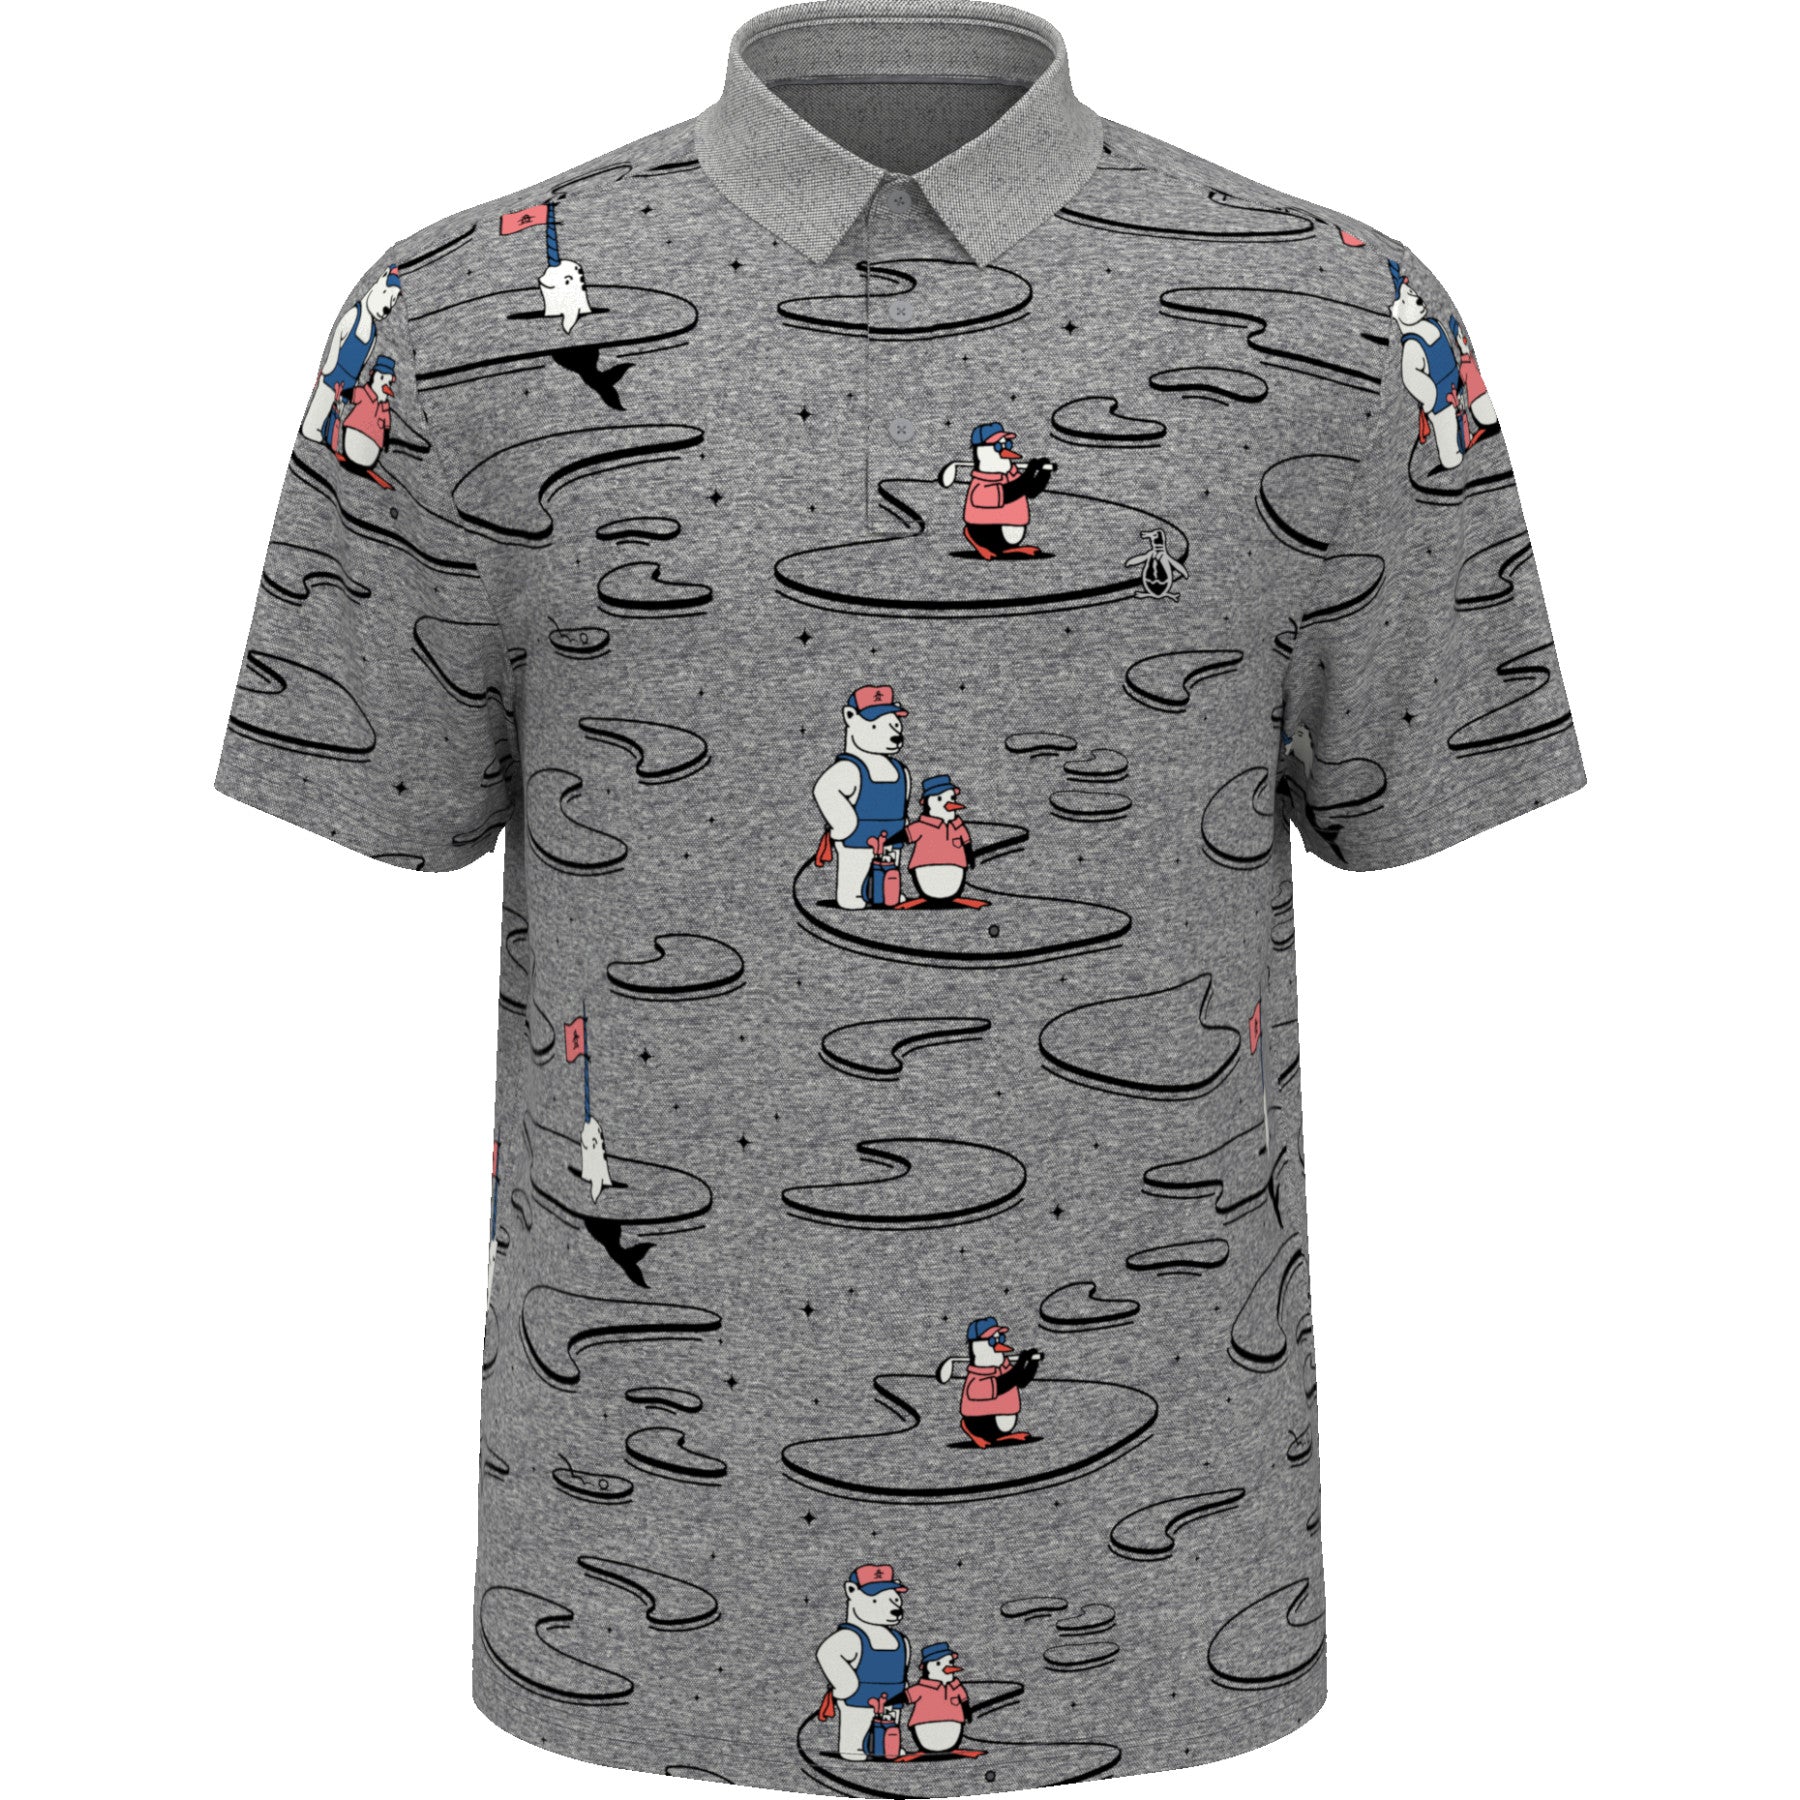 View Oxford Polar Pete Print Golf Polo Shirt In Quiet Shade information